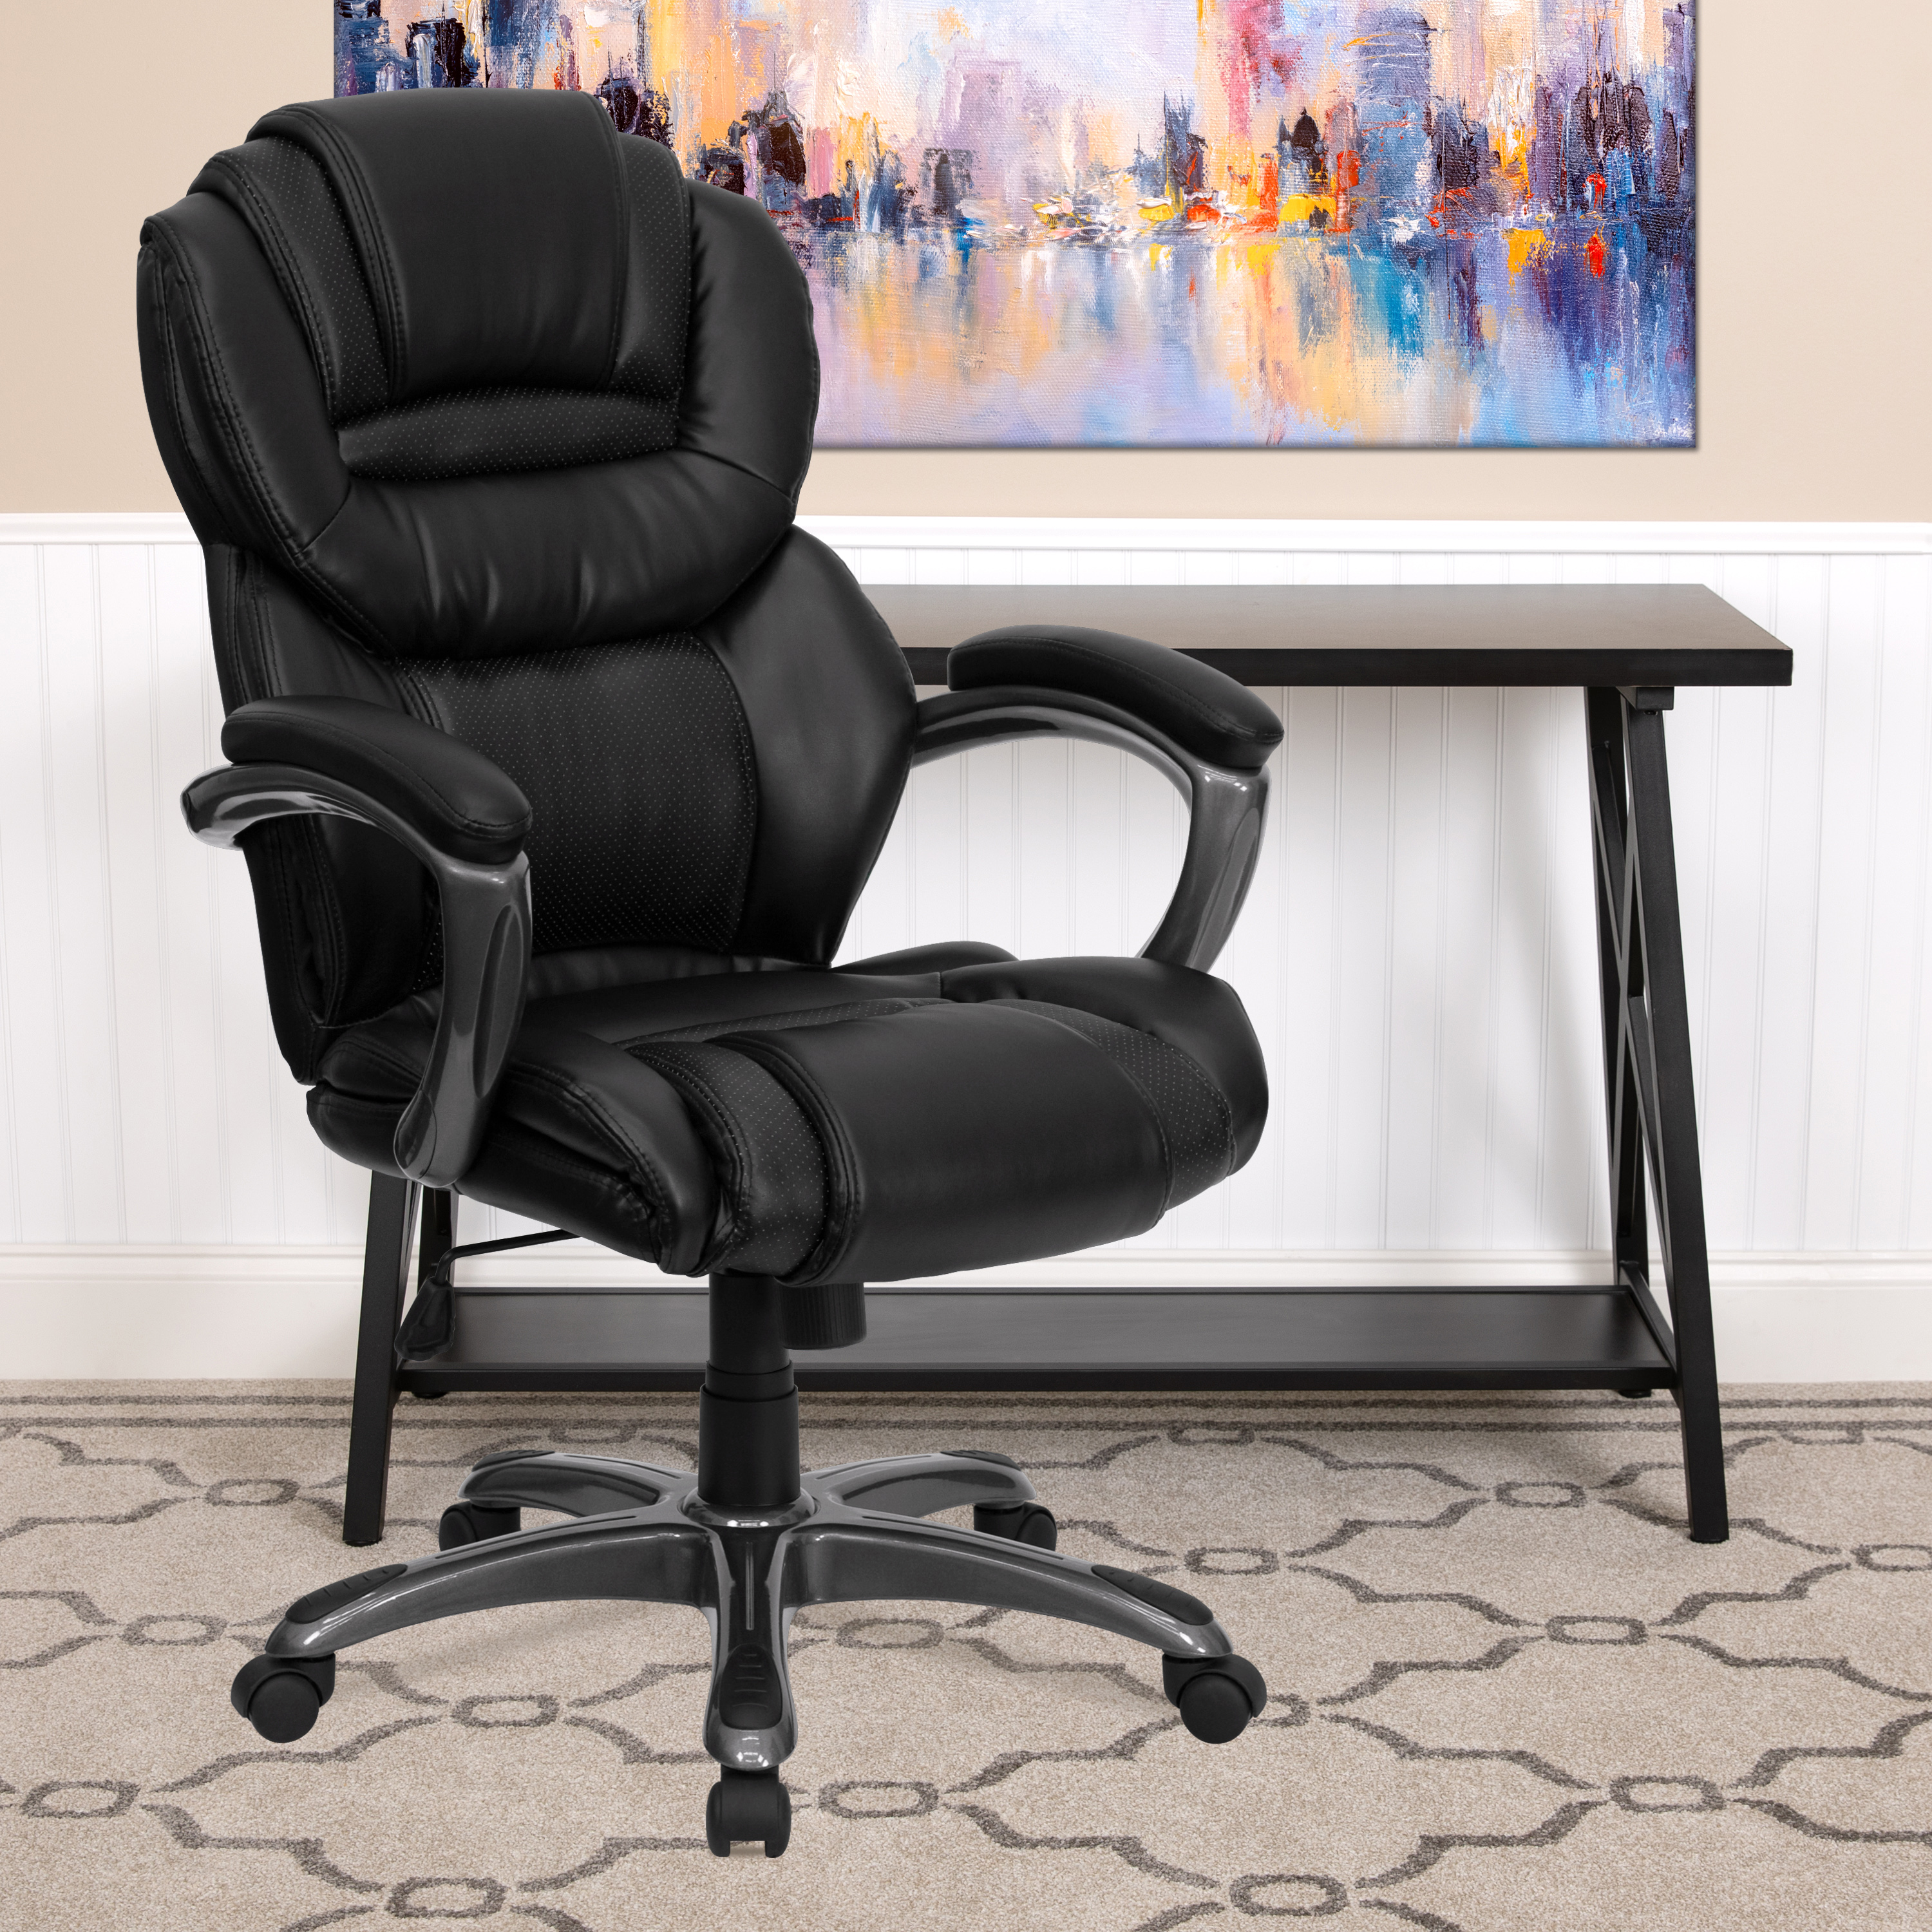 Flash Furniture High Back Black LeatherSoft Executive Swivel Ergonomic Office Chair with Arms - image 2 of 12